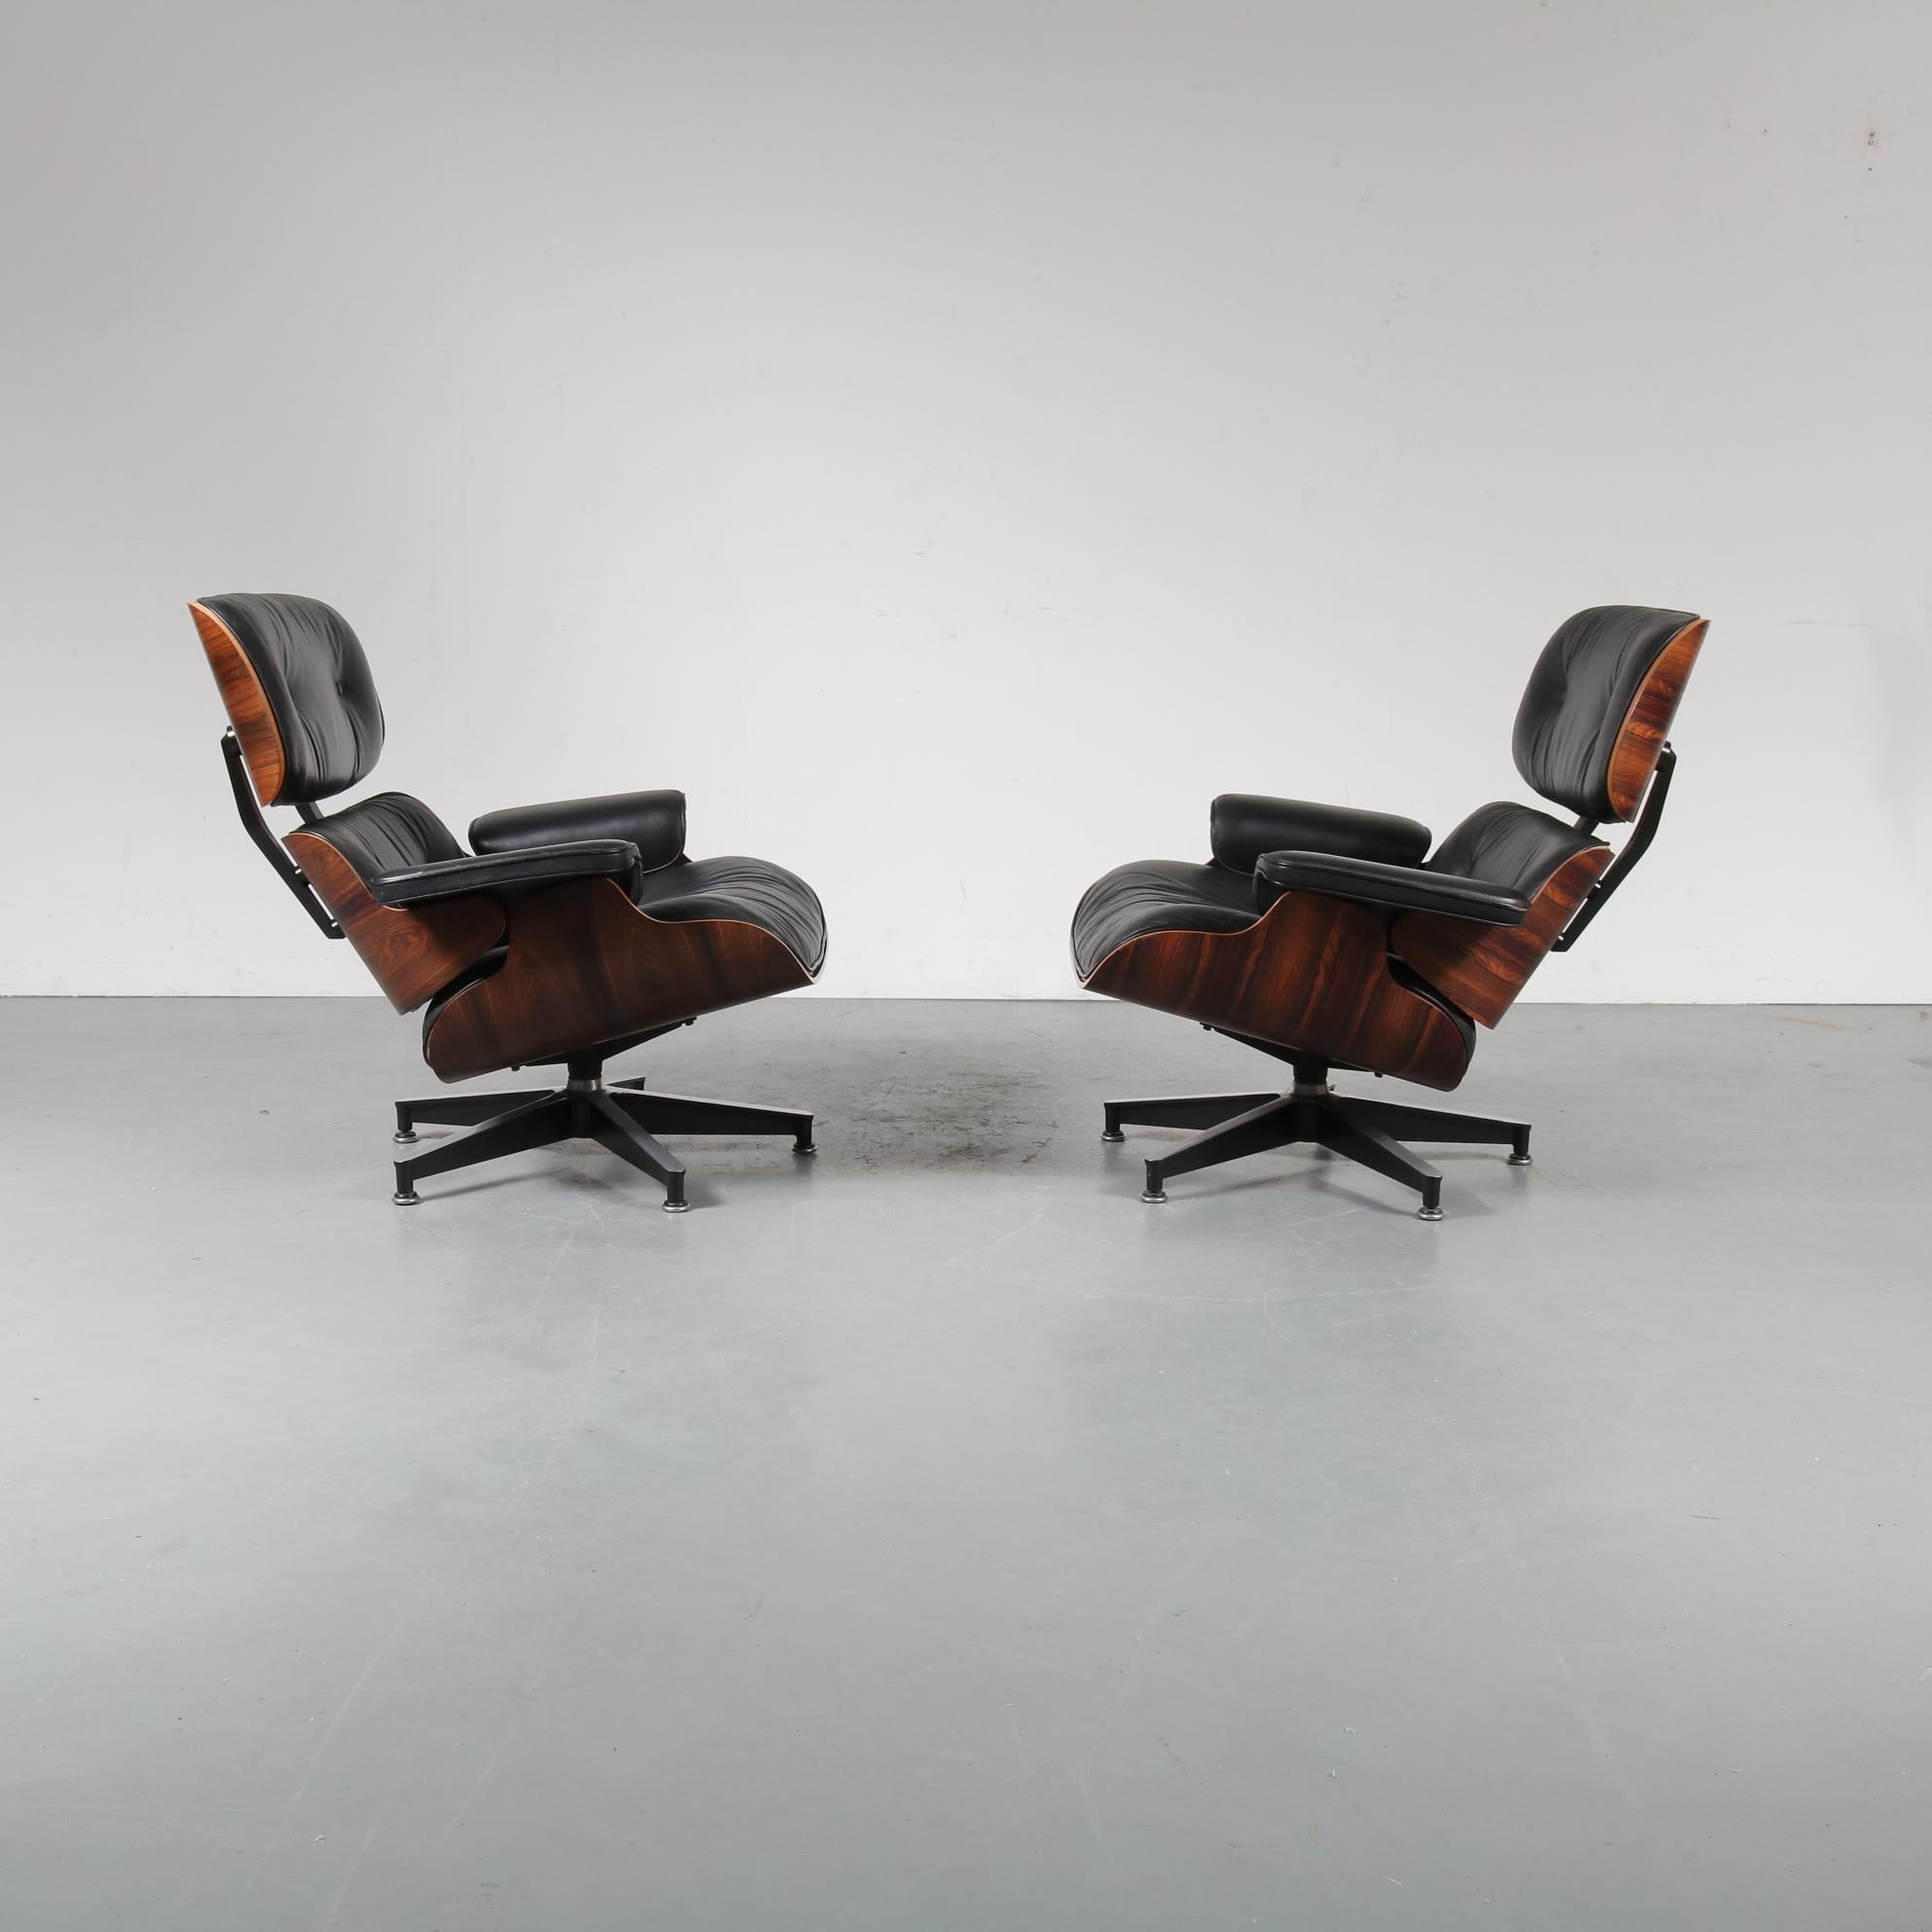 Mid-Century Modern Pair of Charles and Ray Eames Lounge Chairs for Herman Miller, circa 1970